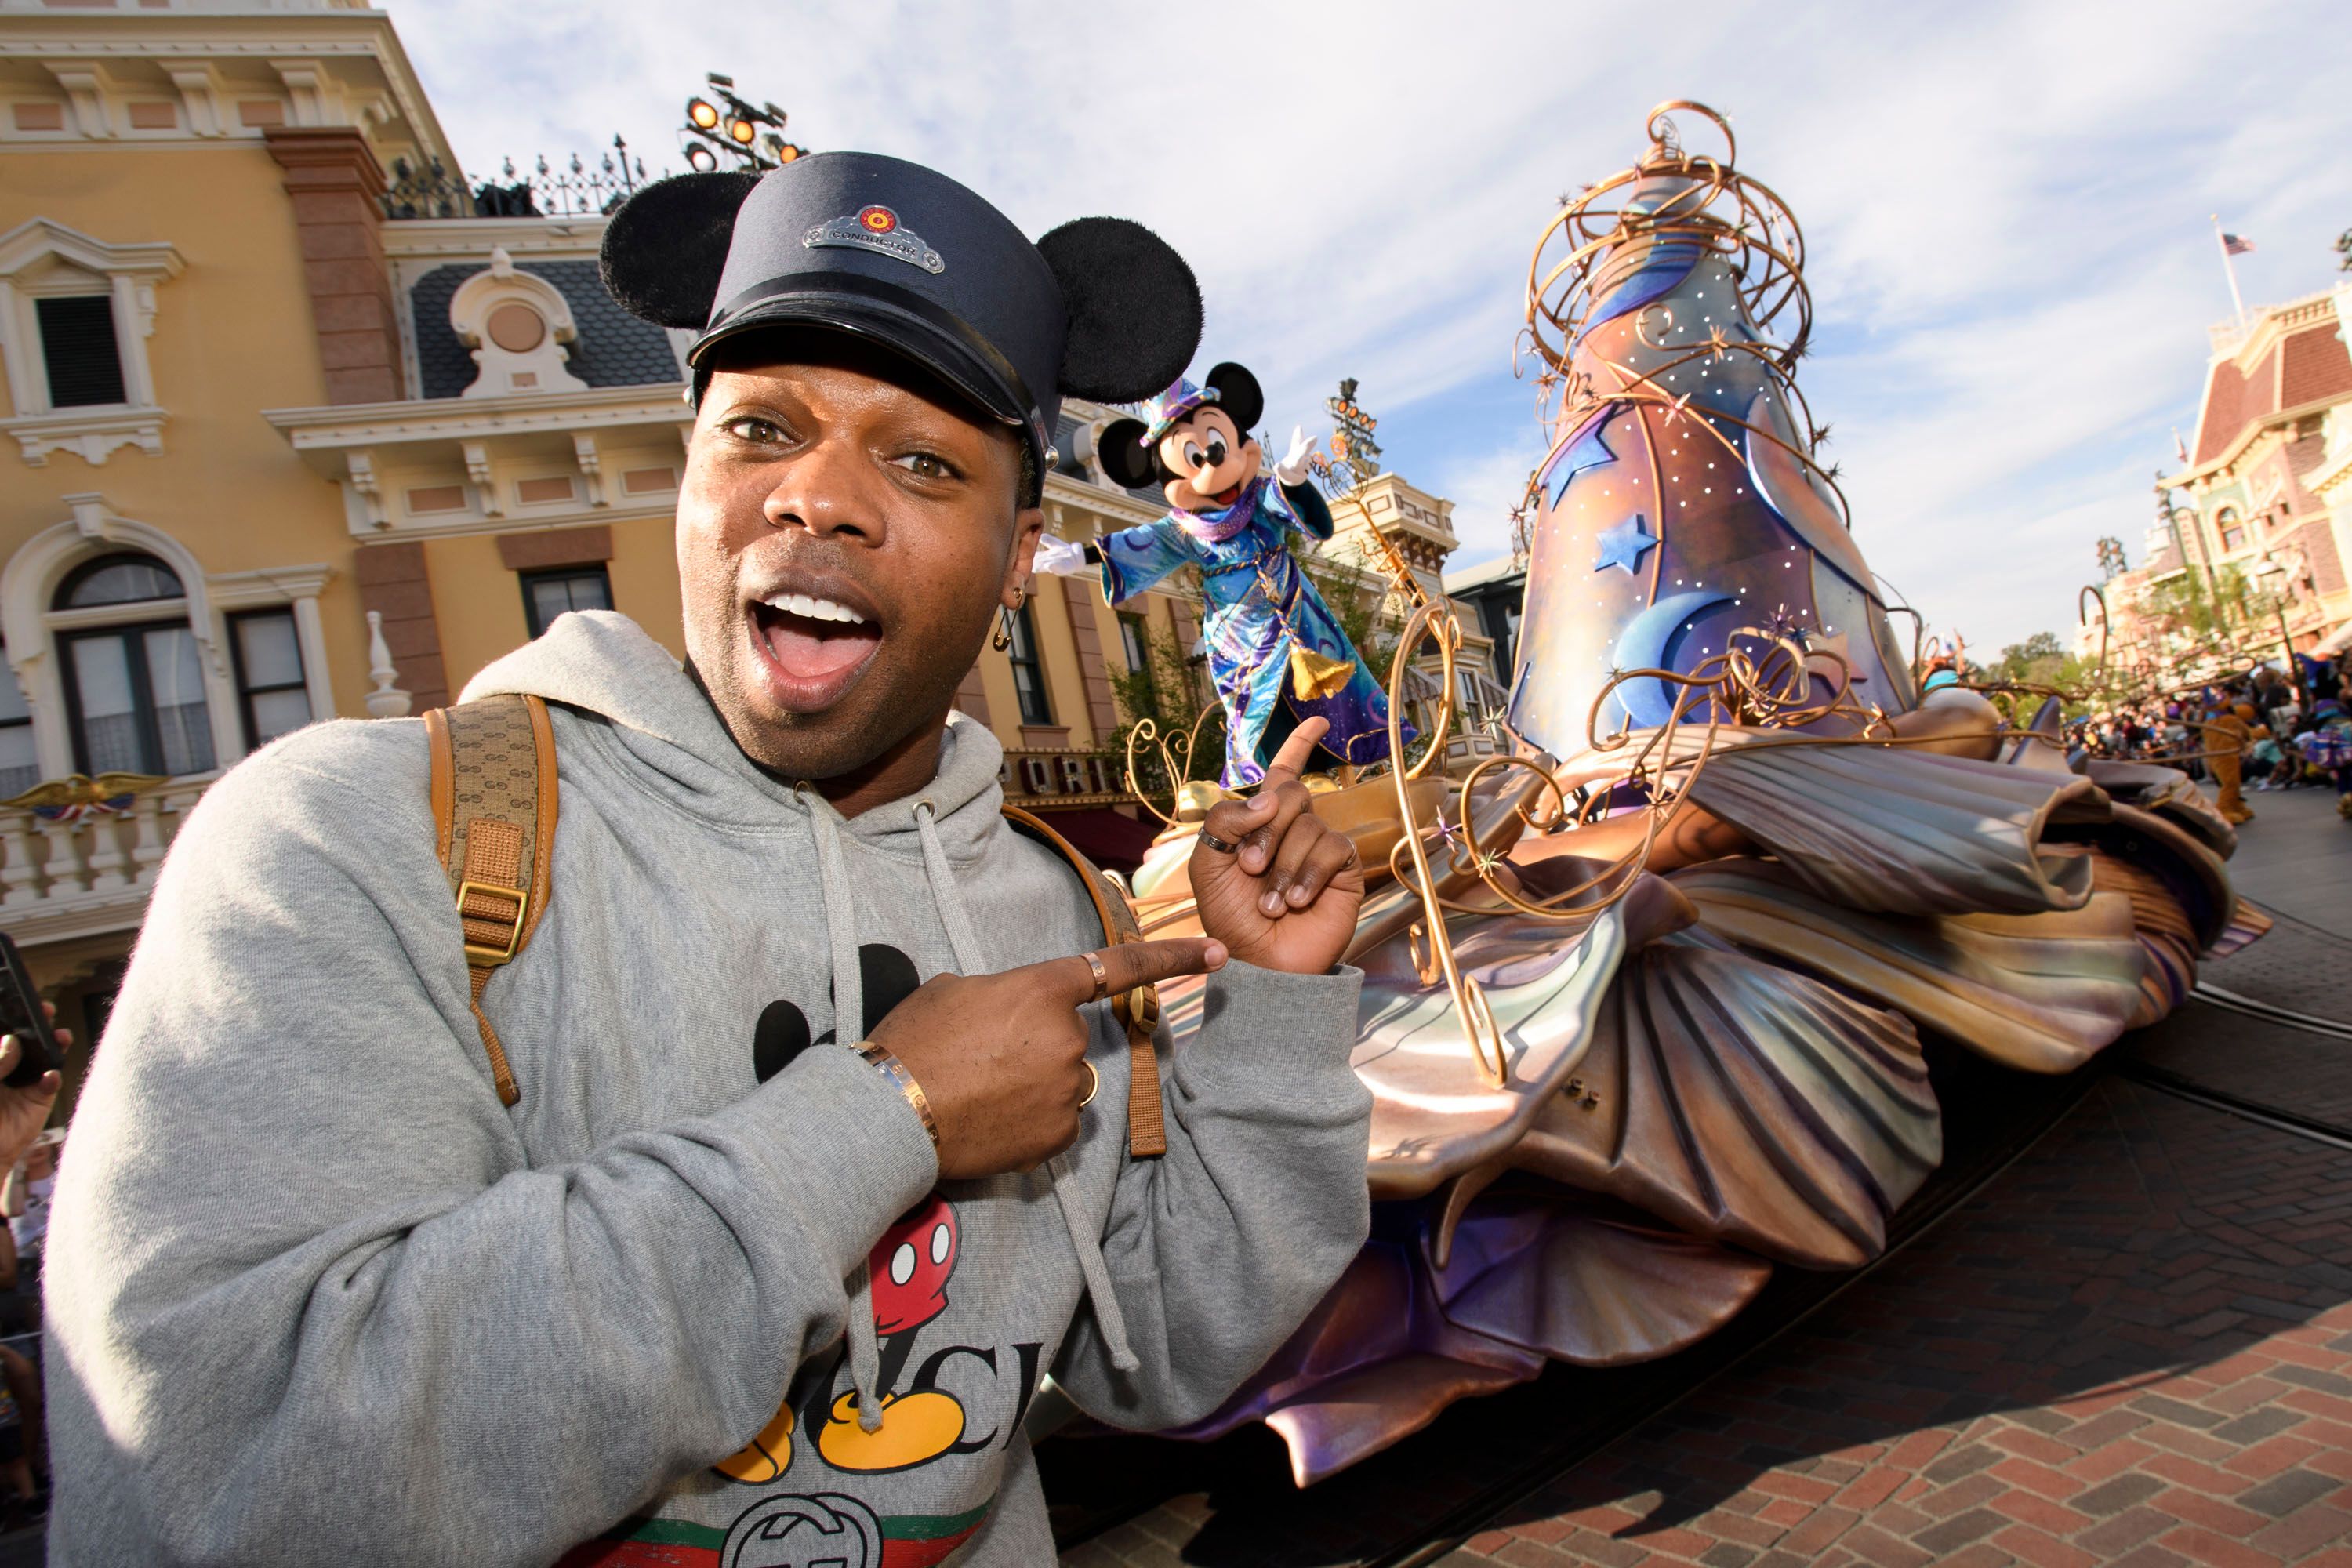 ANAHEIM, CALIFORNIA - FEBRUARY 28:  In this handout photo provided by Disneyland Resort, singer Todrick Hall poses with Mickey Mouse during the official debut of the &quot;Magic Happens&quot; parade at Disneyland Park on February 28, 2020 in Anaheim, California. (Photo by Richard Harbaugh/Disneyland Resort via Getty Images)